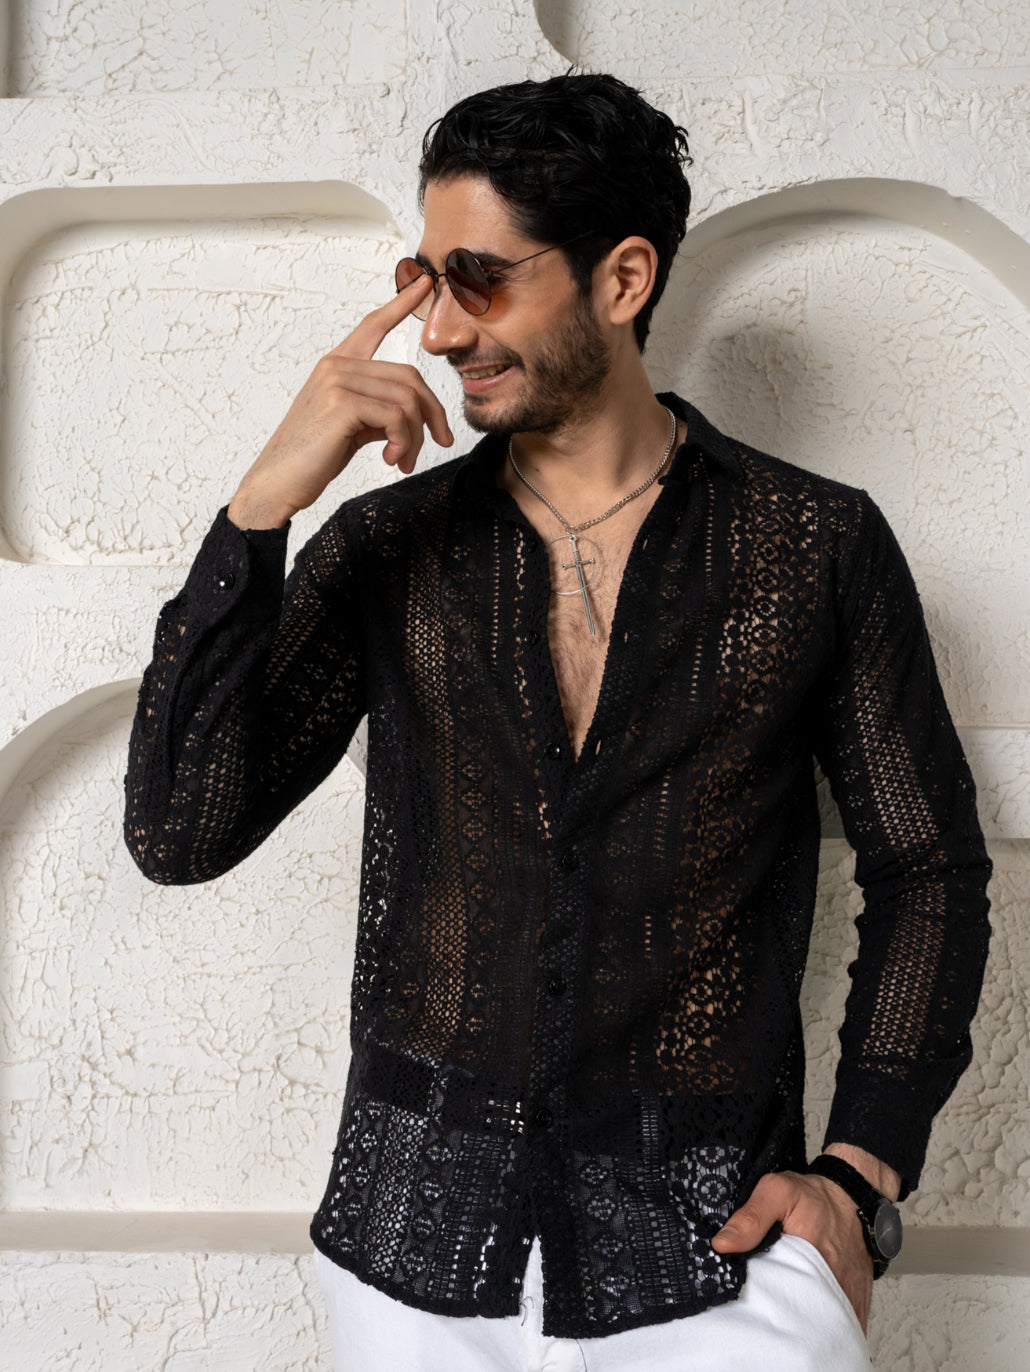 Firangi Yarn Crochet Cotton Black Lace Shirt For Men- Full Sleeves(Take One Size Bigger Than Your Usual Size)